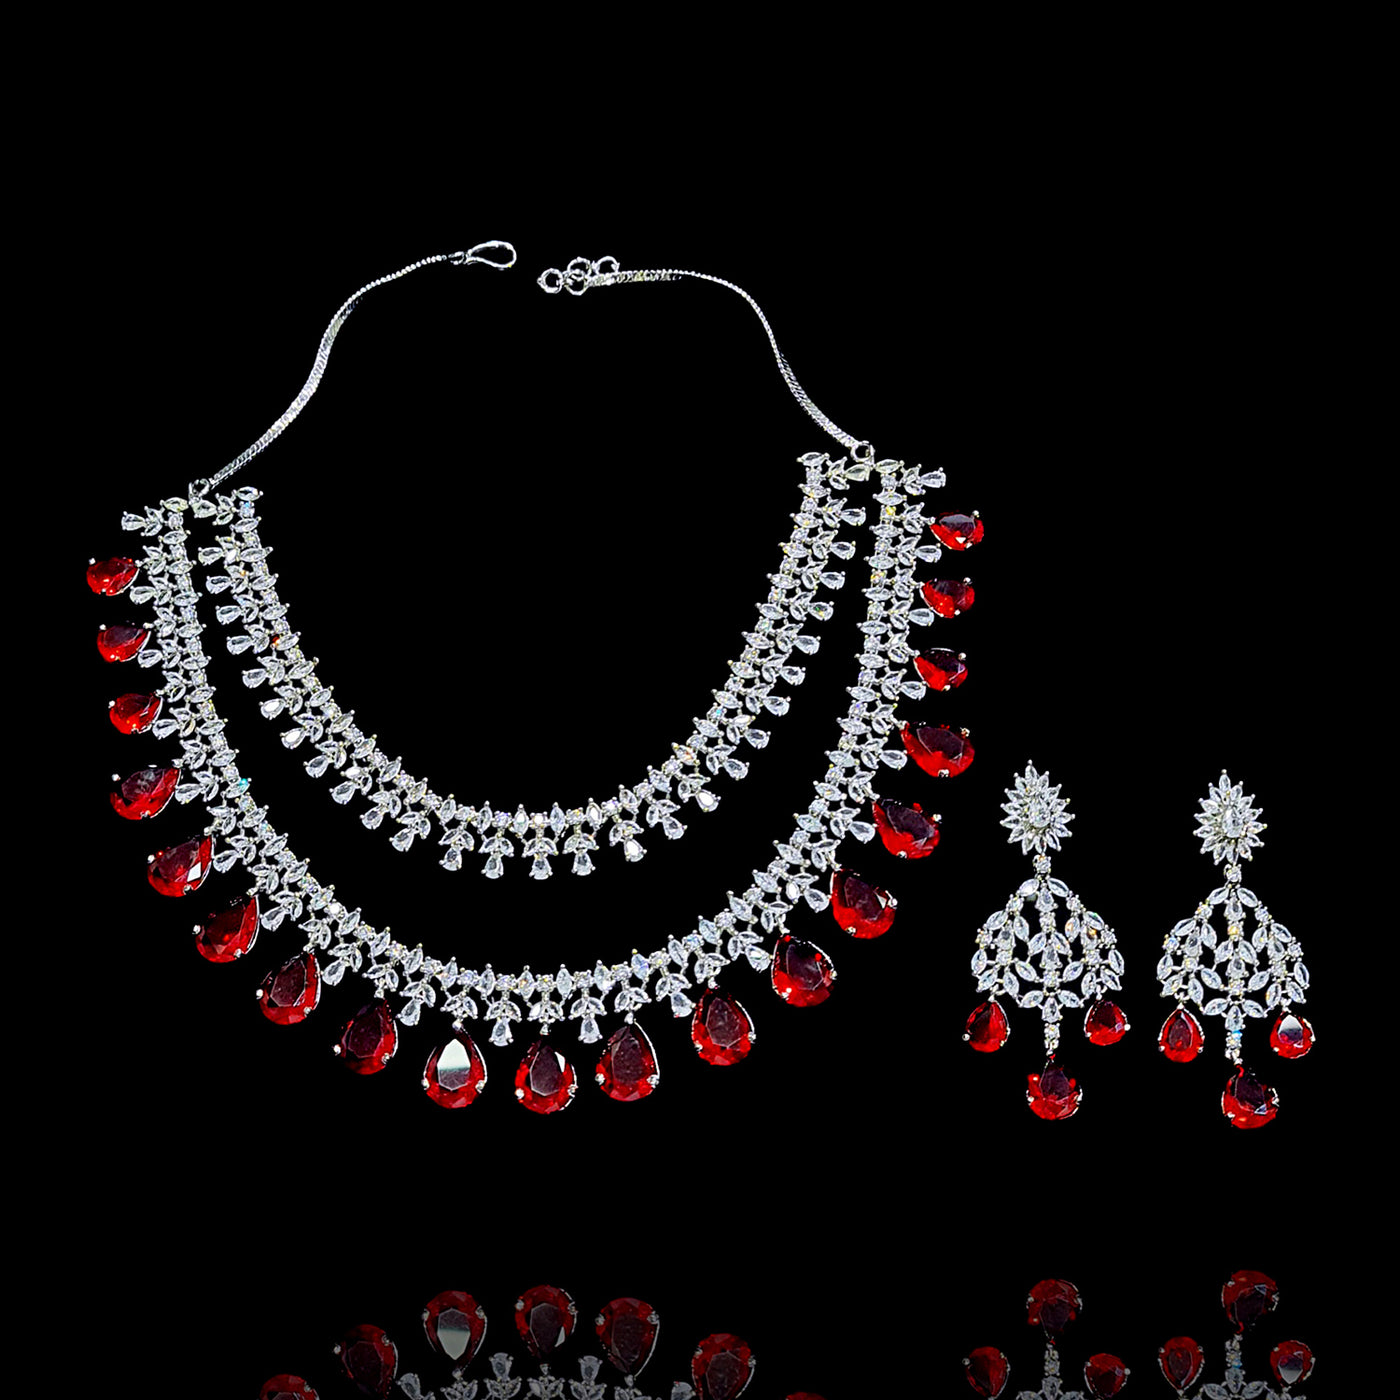 Tripti Set - Available in 3 Colors